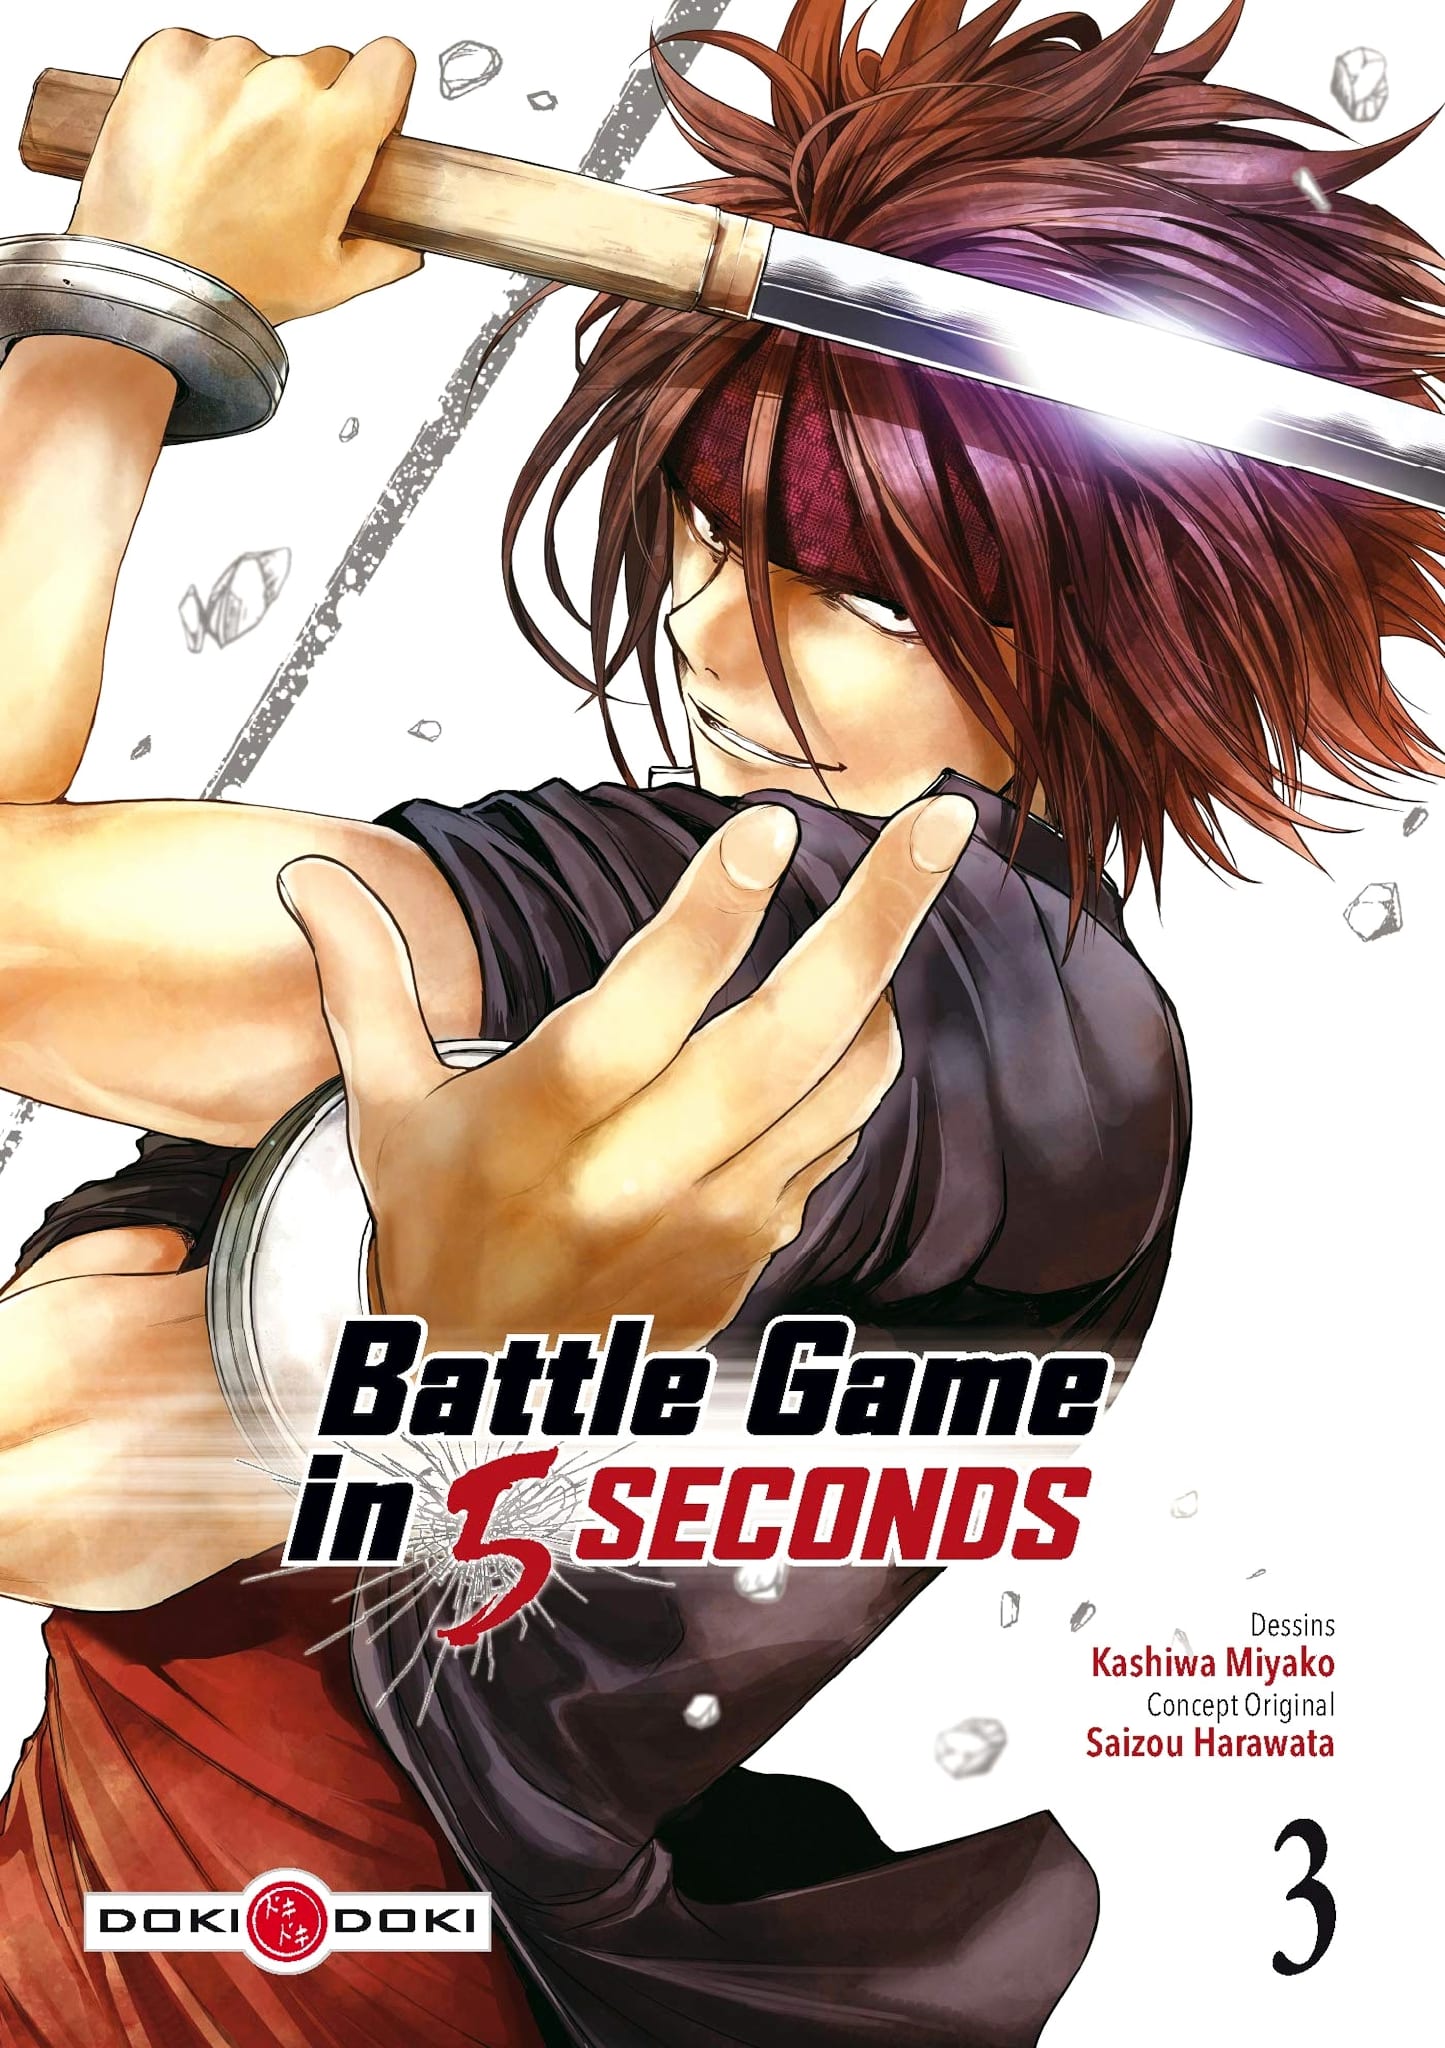 Tome 3 du manga Battle Game in 5 Seconds